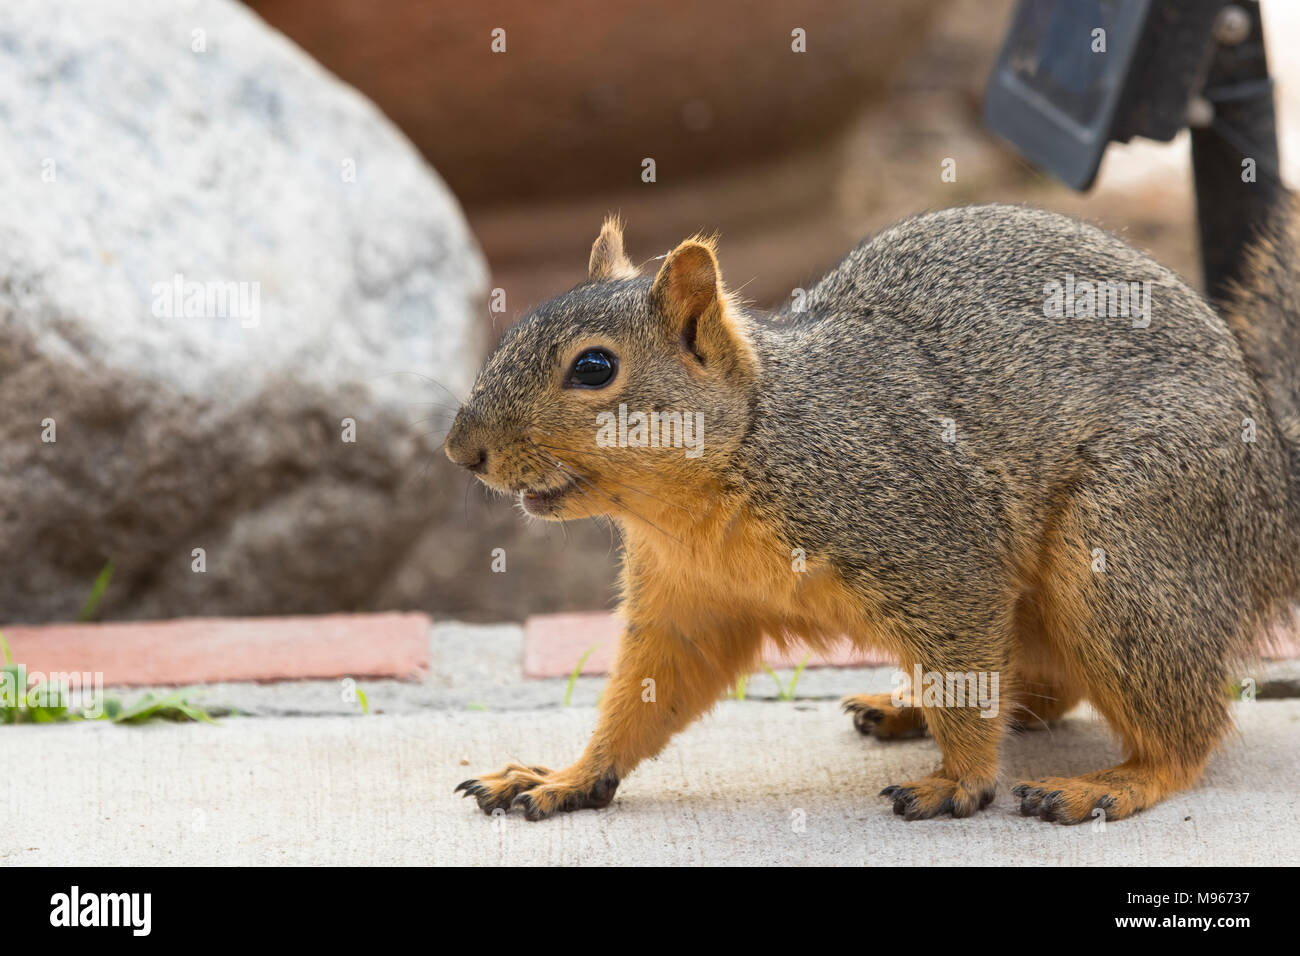 A squirrel on the ground in a garden in Southern California USA Stock Photo